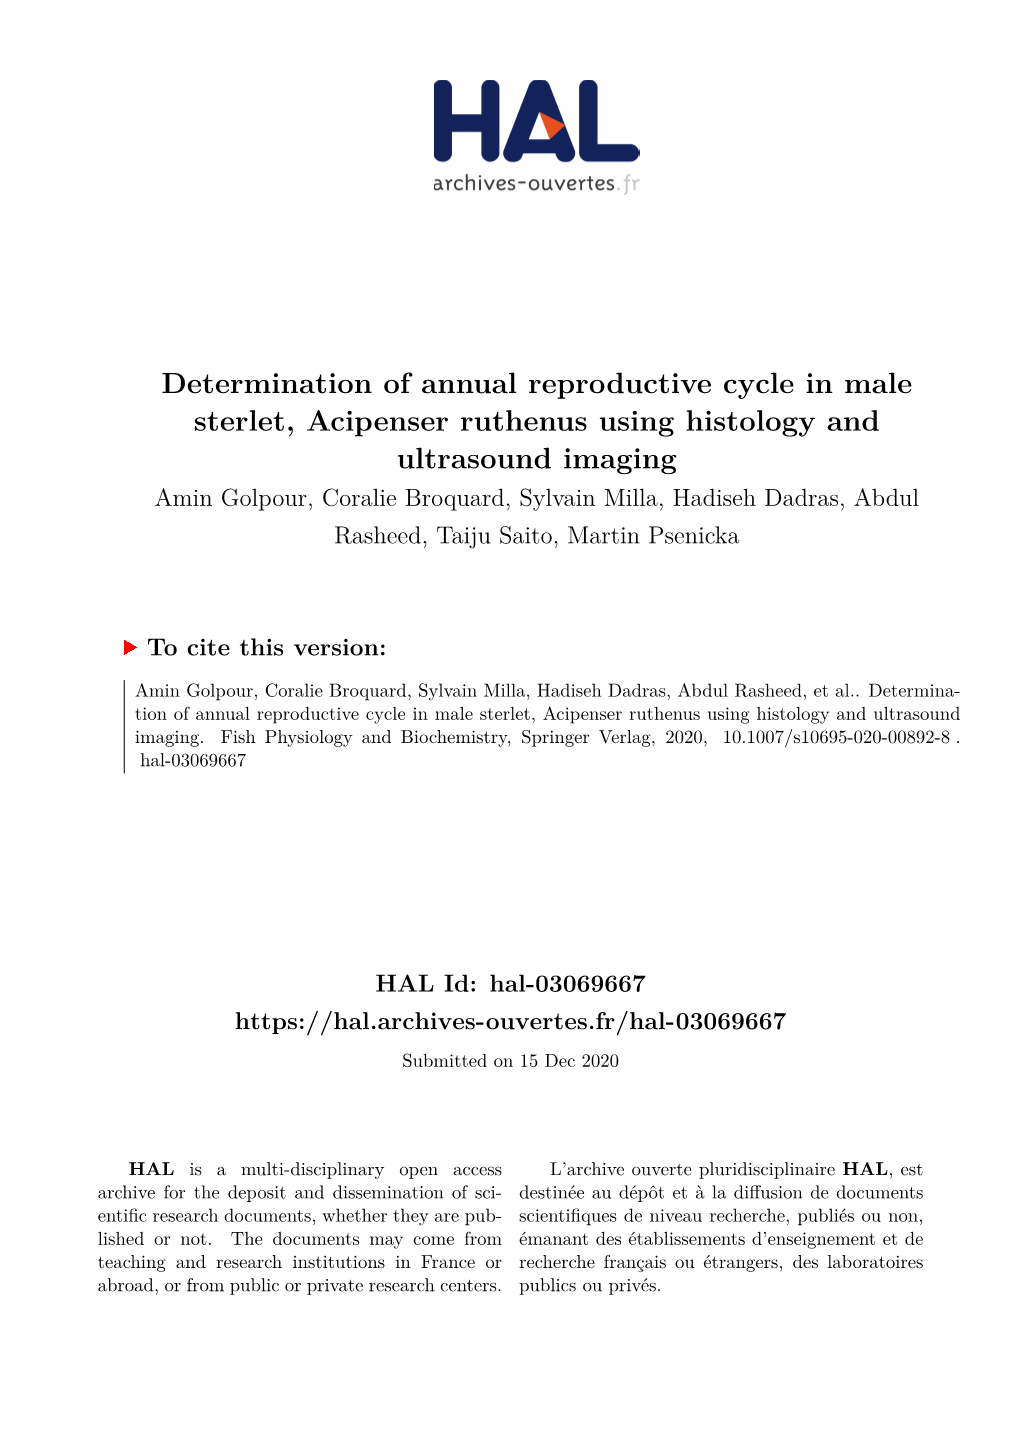 Determination of Annual Reproductive Cycle in Male Sterlet, Acipenser